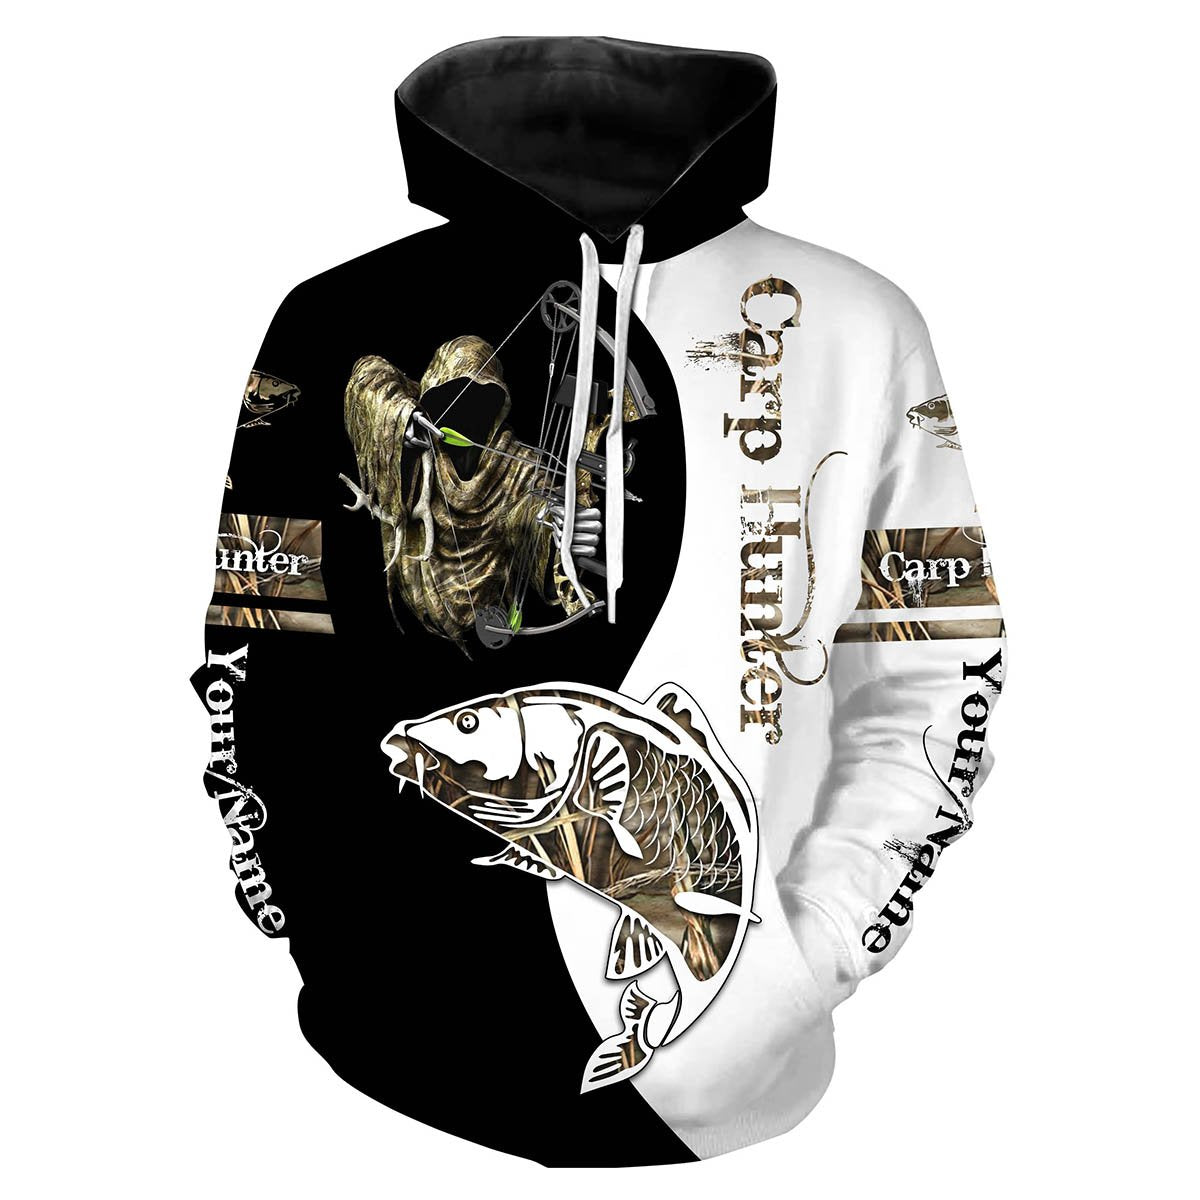 Carp Hunter Bowfishing Customize Name All Over Printed Shirts For Men And Women Personalized Fishing Gift